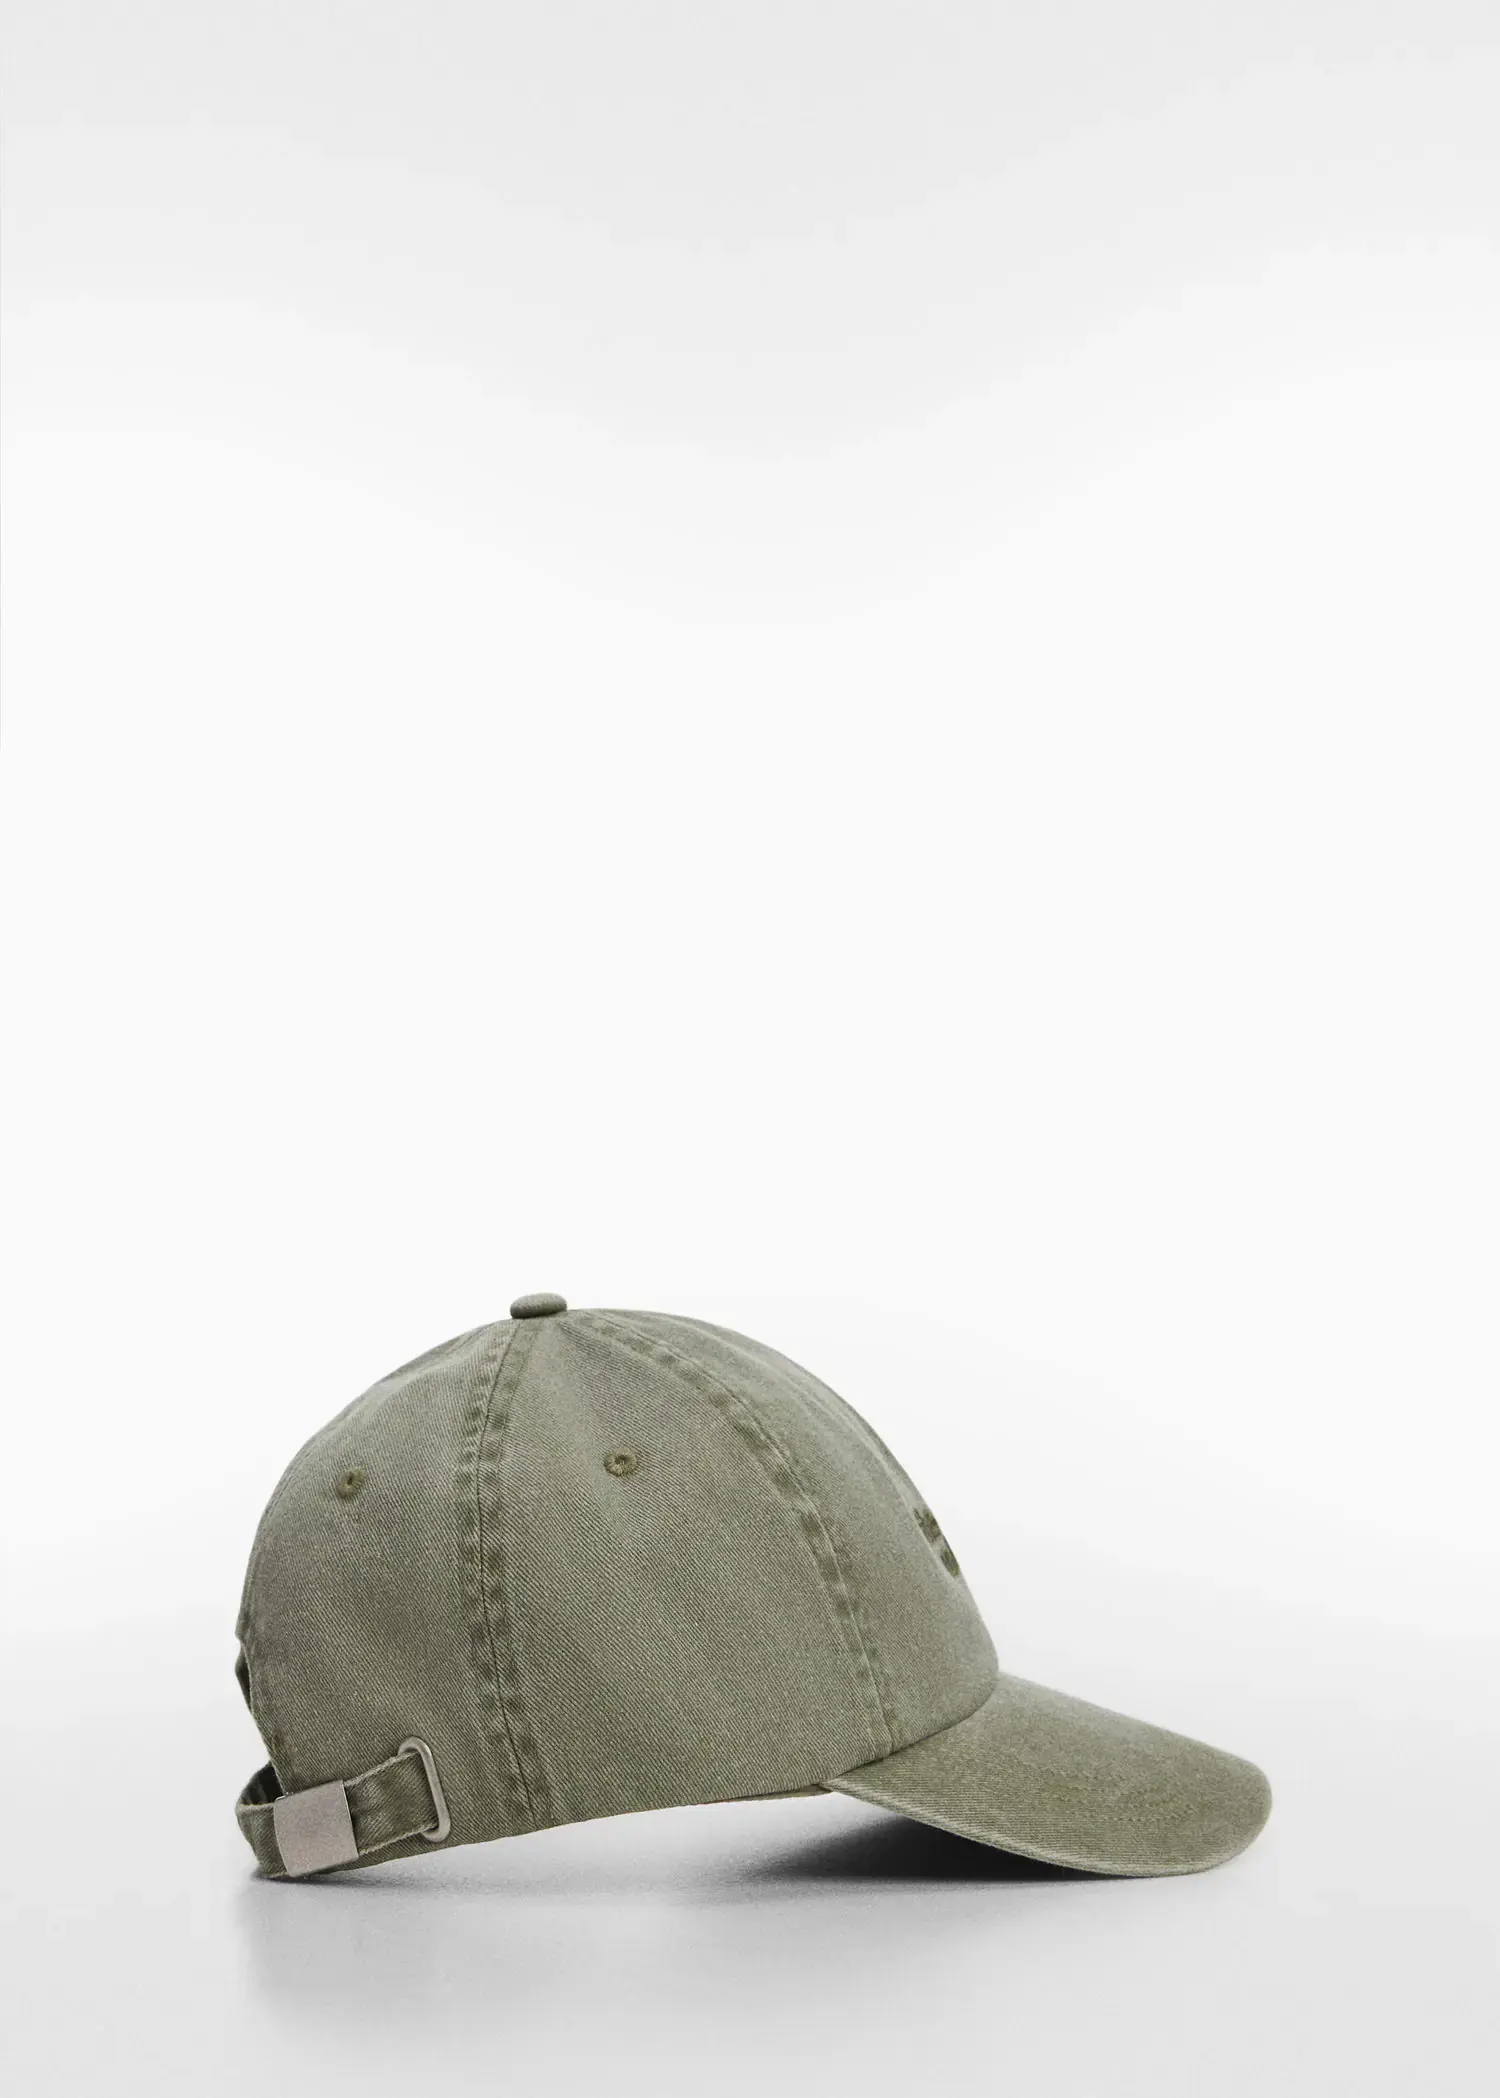 Mango Embroidered message cap. 3